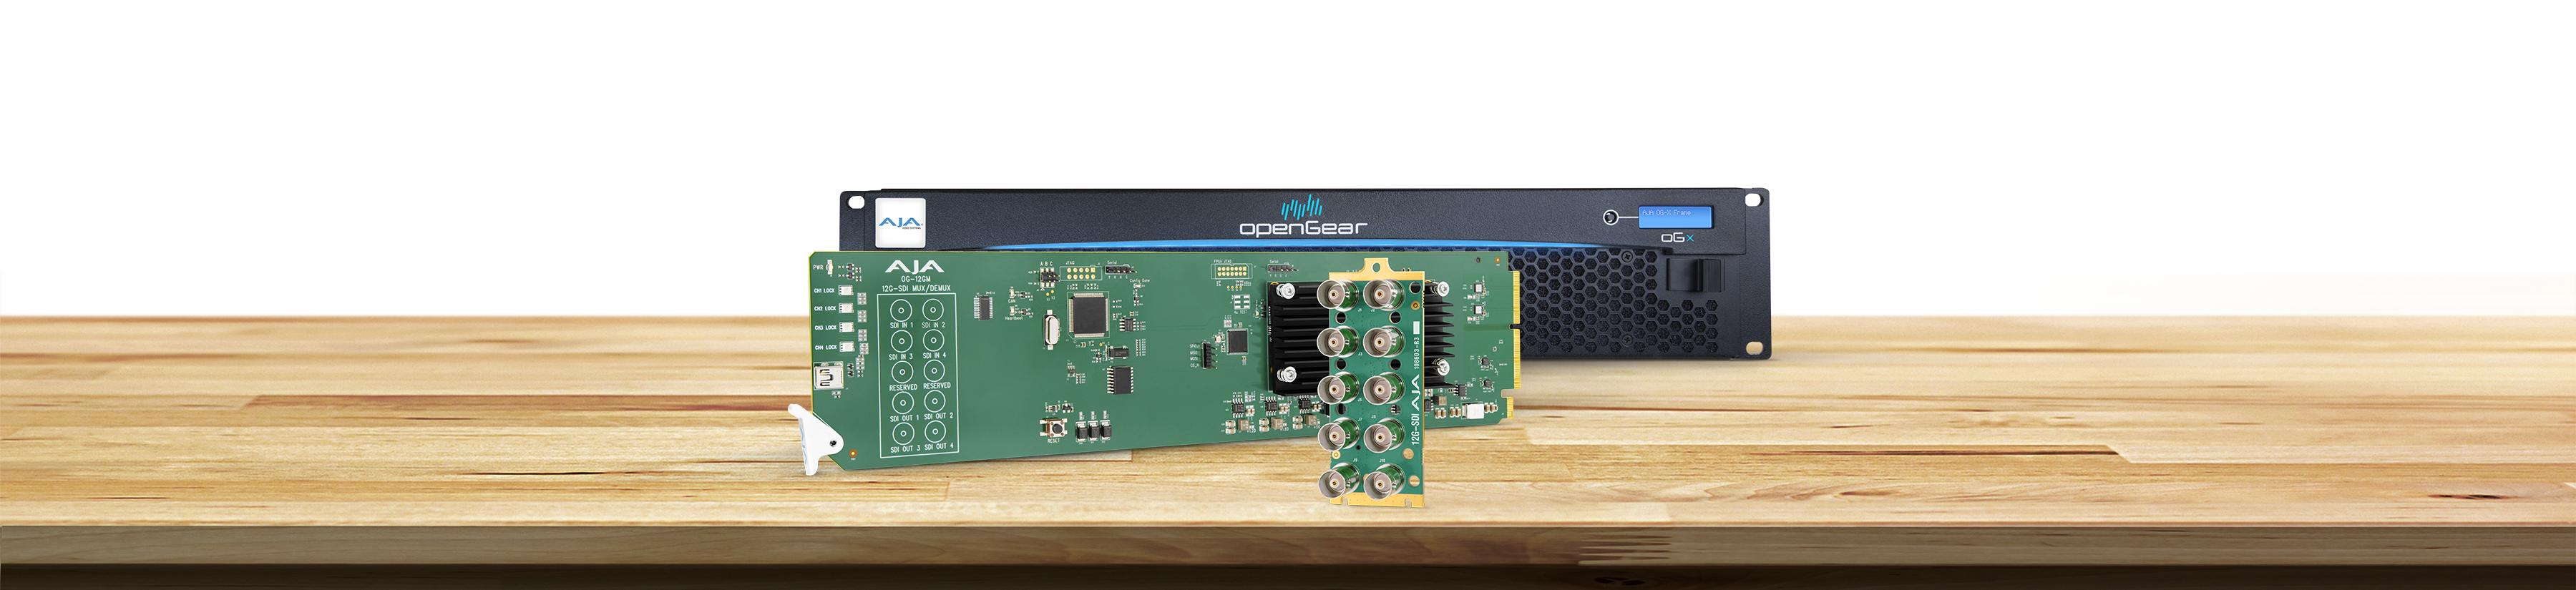 AJA Releases New Firmware for openGear Cards Featuring 12-bit Support for OG-Hi5-4K-Plus